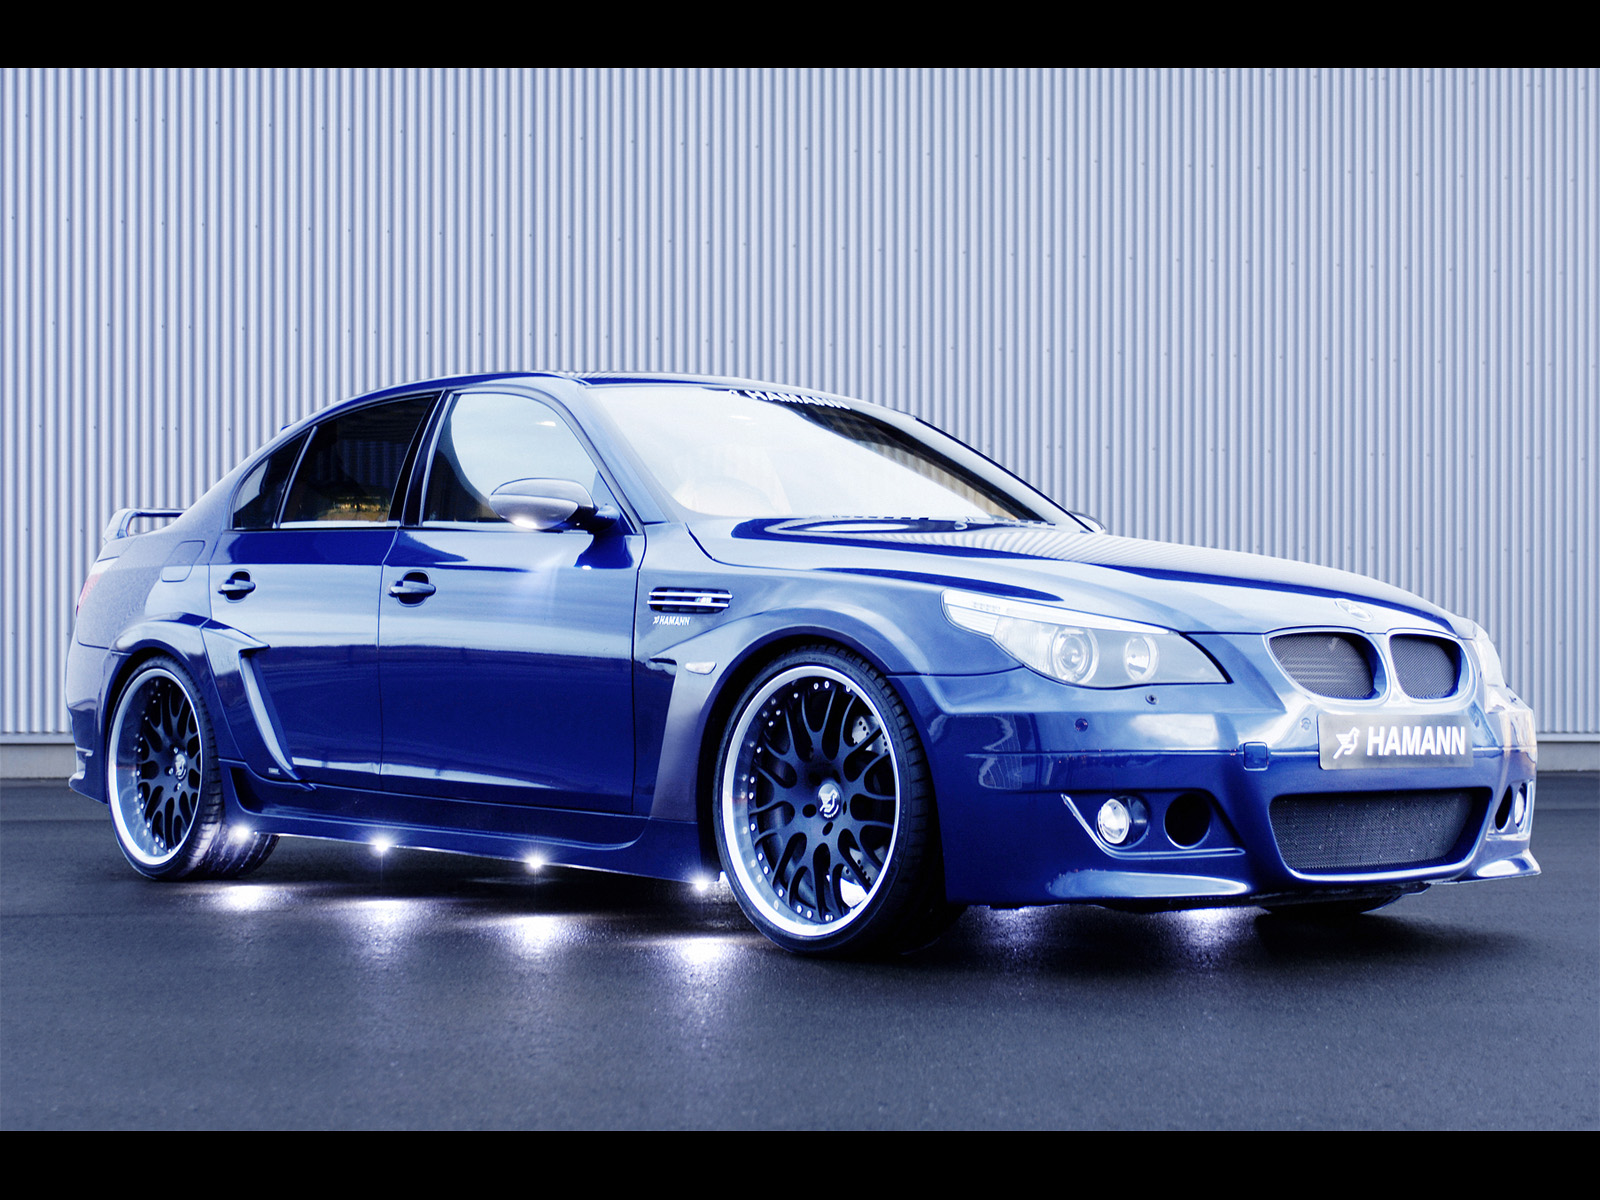 NEW BMW M5 2012 Car Specification And Review  World Car Review